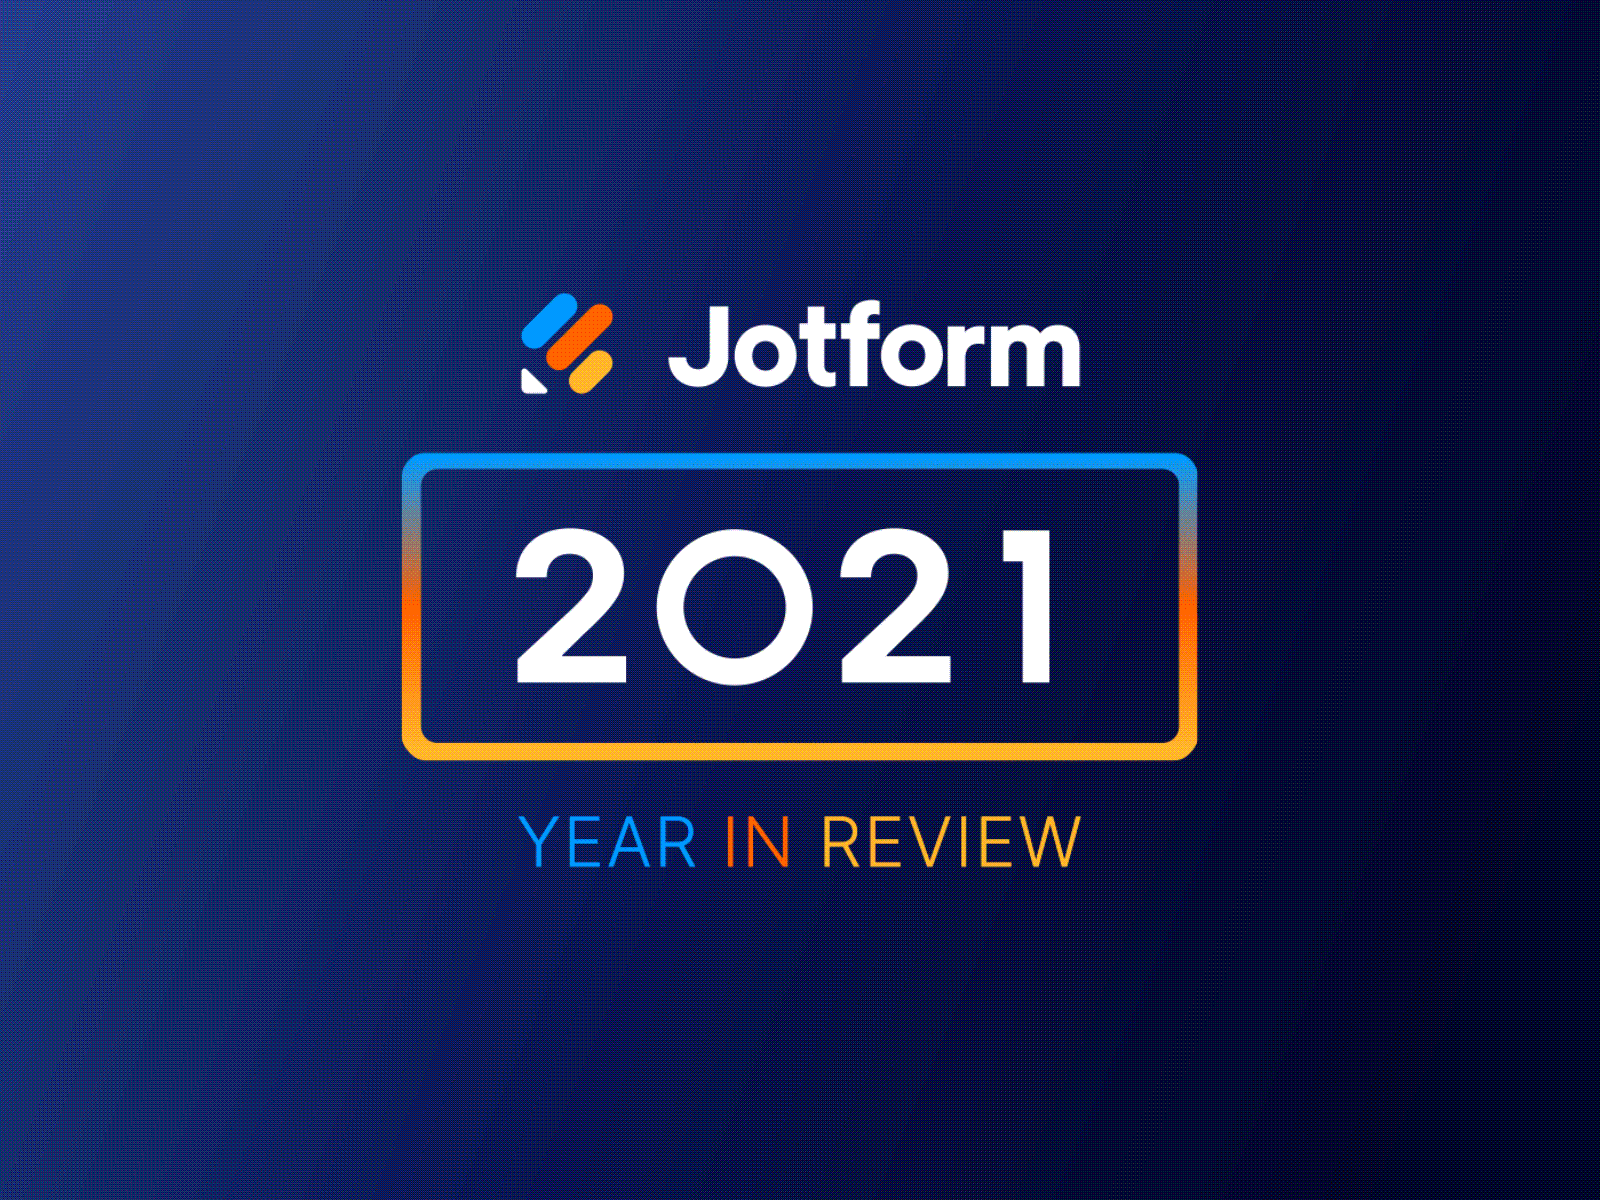 Jotform 2021 Year in Review 2021 calendar 2021 year in review calendar jotform loop products